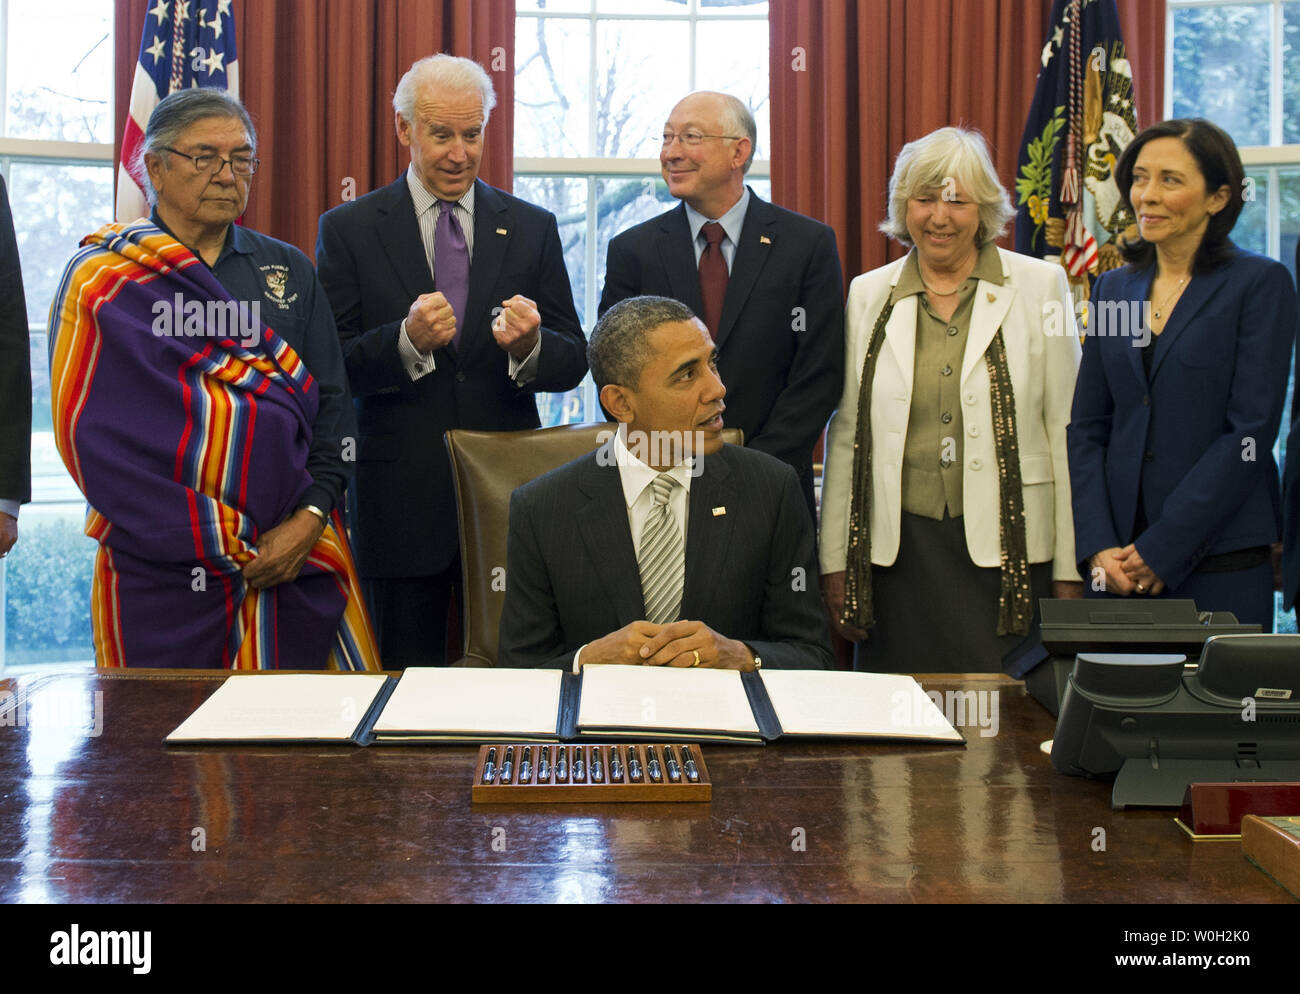 Vice President Joe Biden (2nd-L) jesters as he stands next to Interior Secretary Ken Salazar, prior to President Barack Obama signing a bill designating the First State Monument, in Delaware, a National Monument, during a bill signing ceremony in the Oval Office at the White House on March 25, 2013 in Washington, D.C. President Obama signed a series of bills designating five new National Monuments, including, Rio Grande del Norte, in New Mexico, the First State Monument in Delaware, the Harriet Tubman Underground Railroad in Maryland, the Charles Young Buffalo Soldiers in Ohio and the San Juan Stock Photo